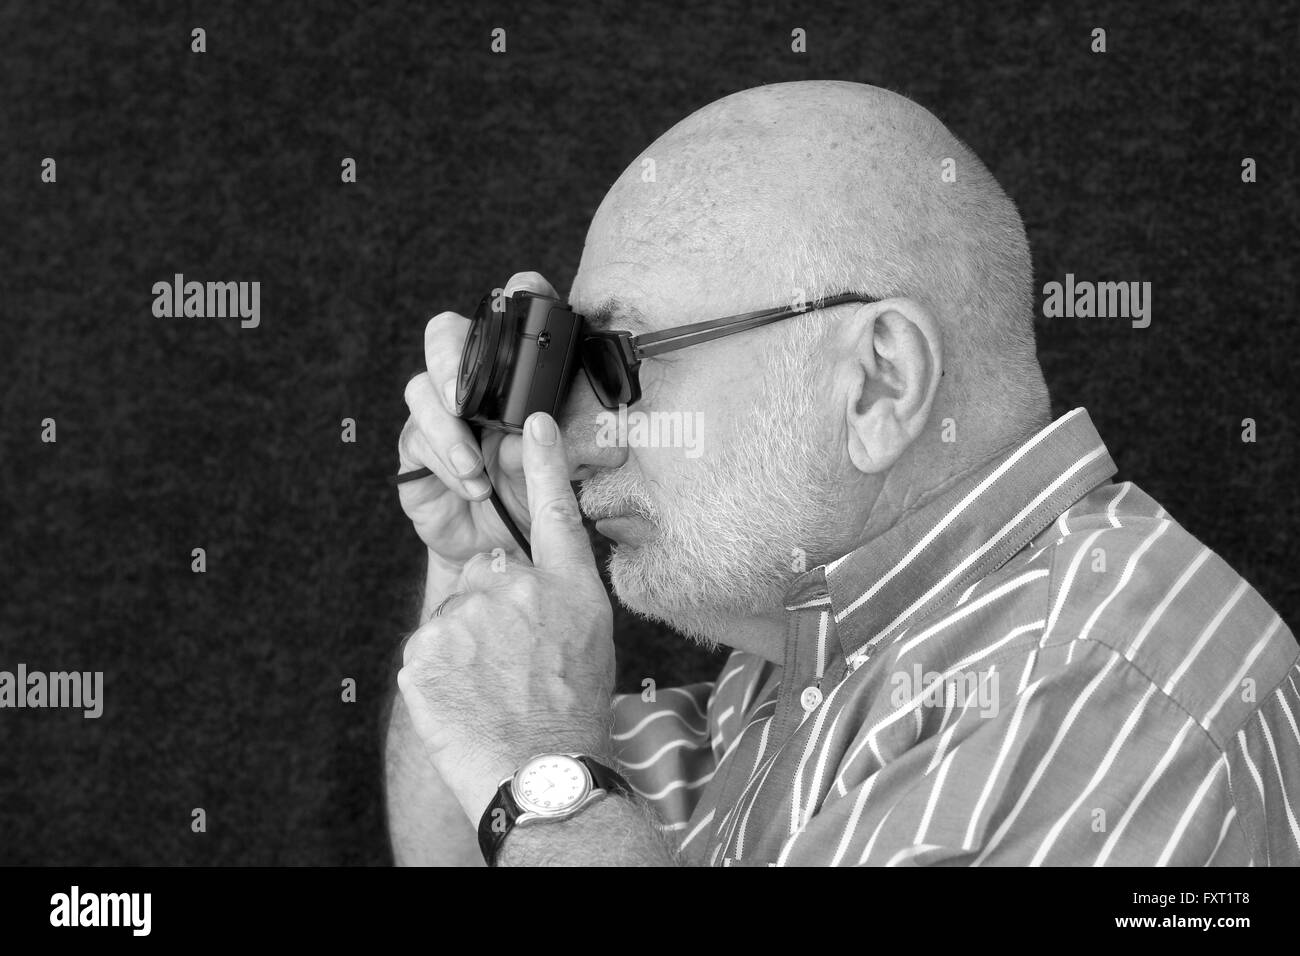 An old man taking a photograph in black and white. Stock Photo